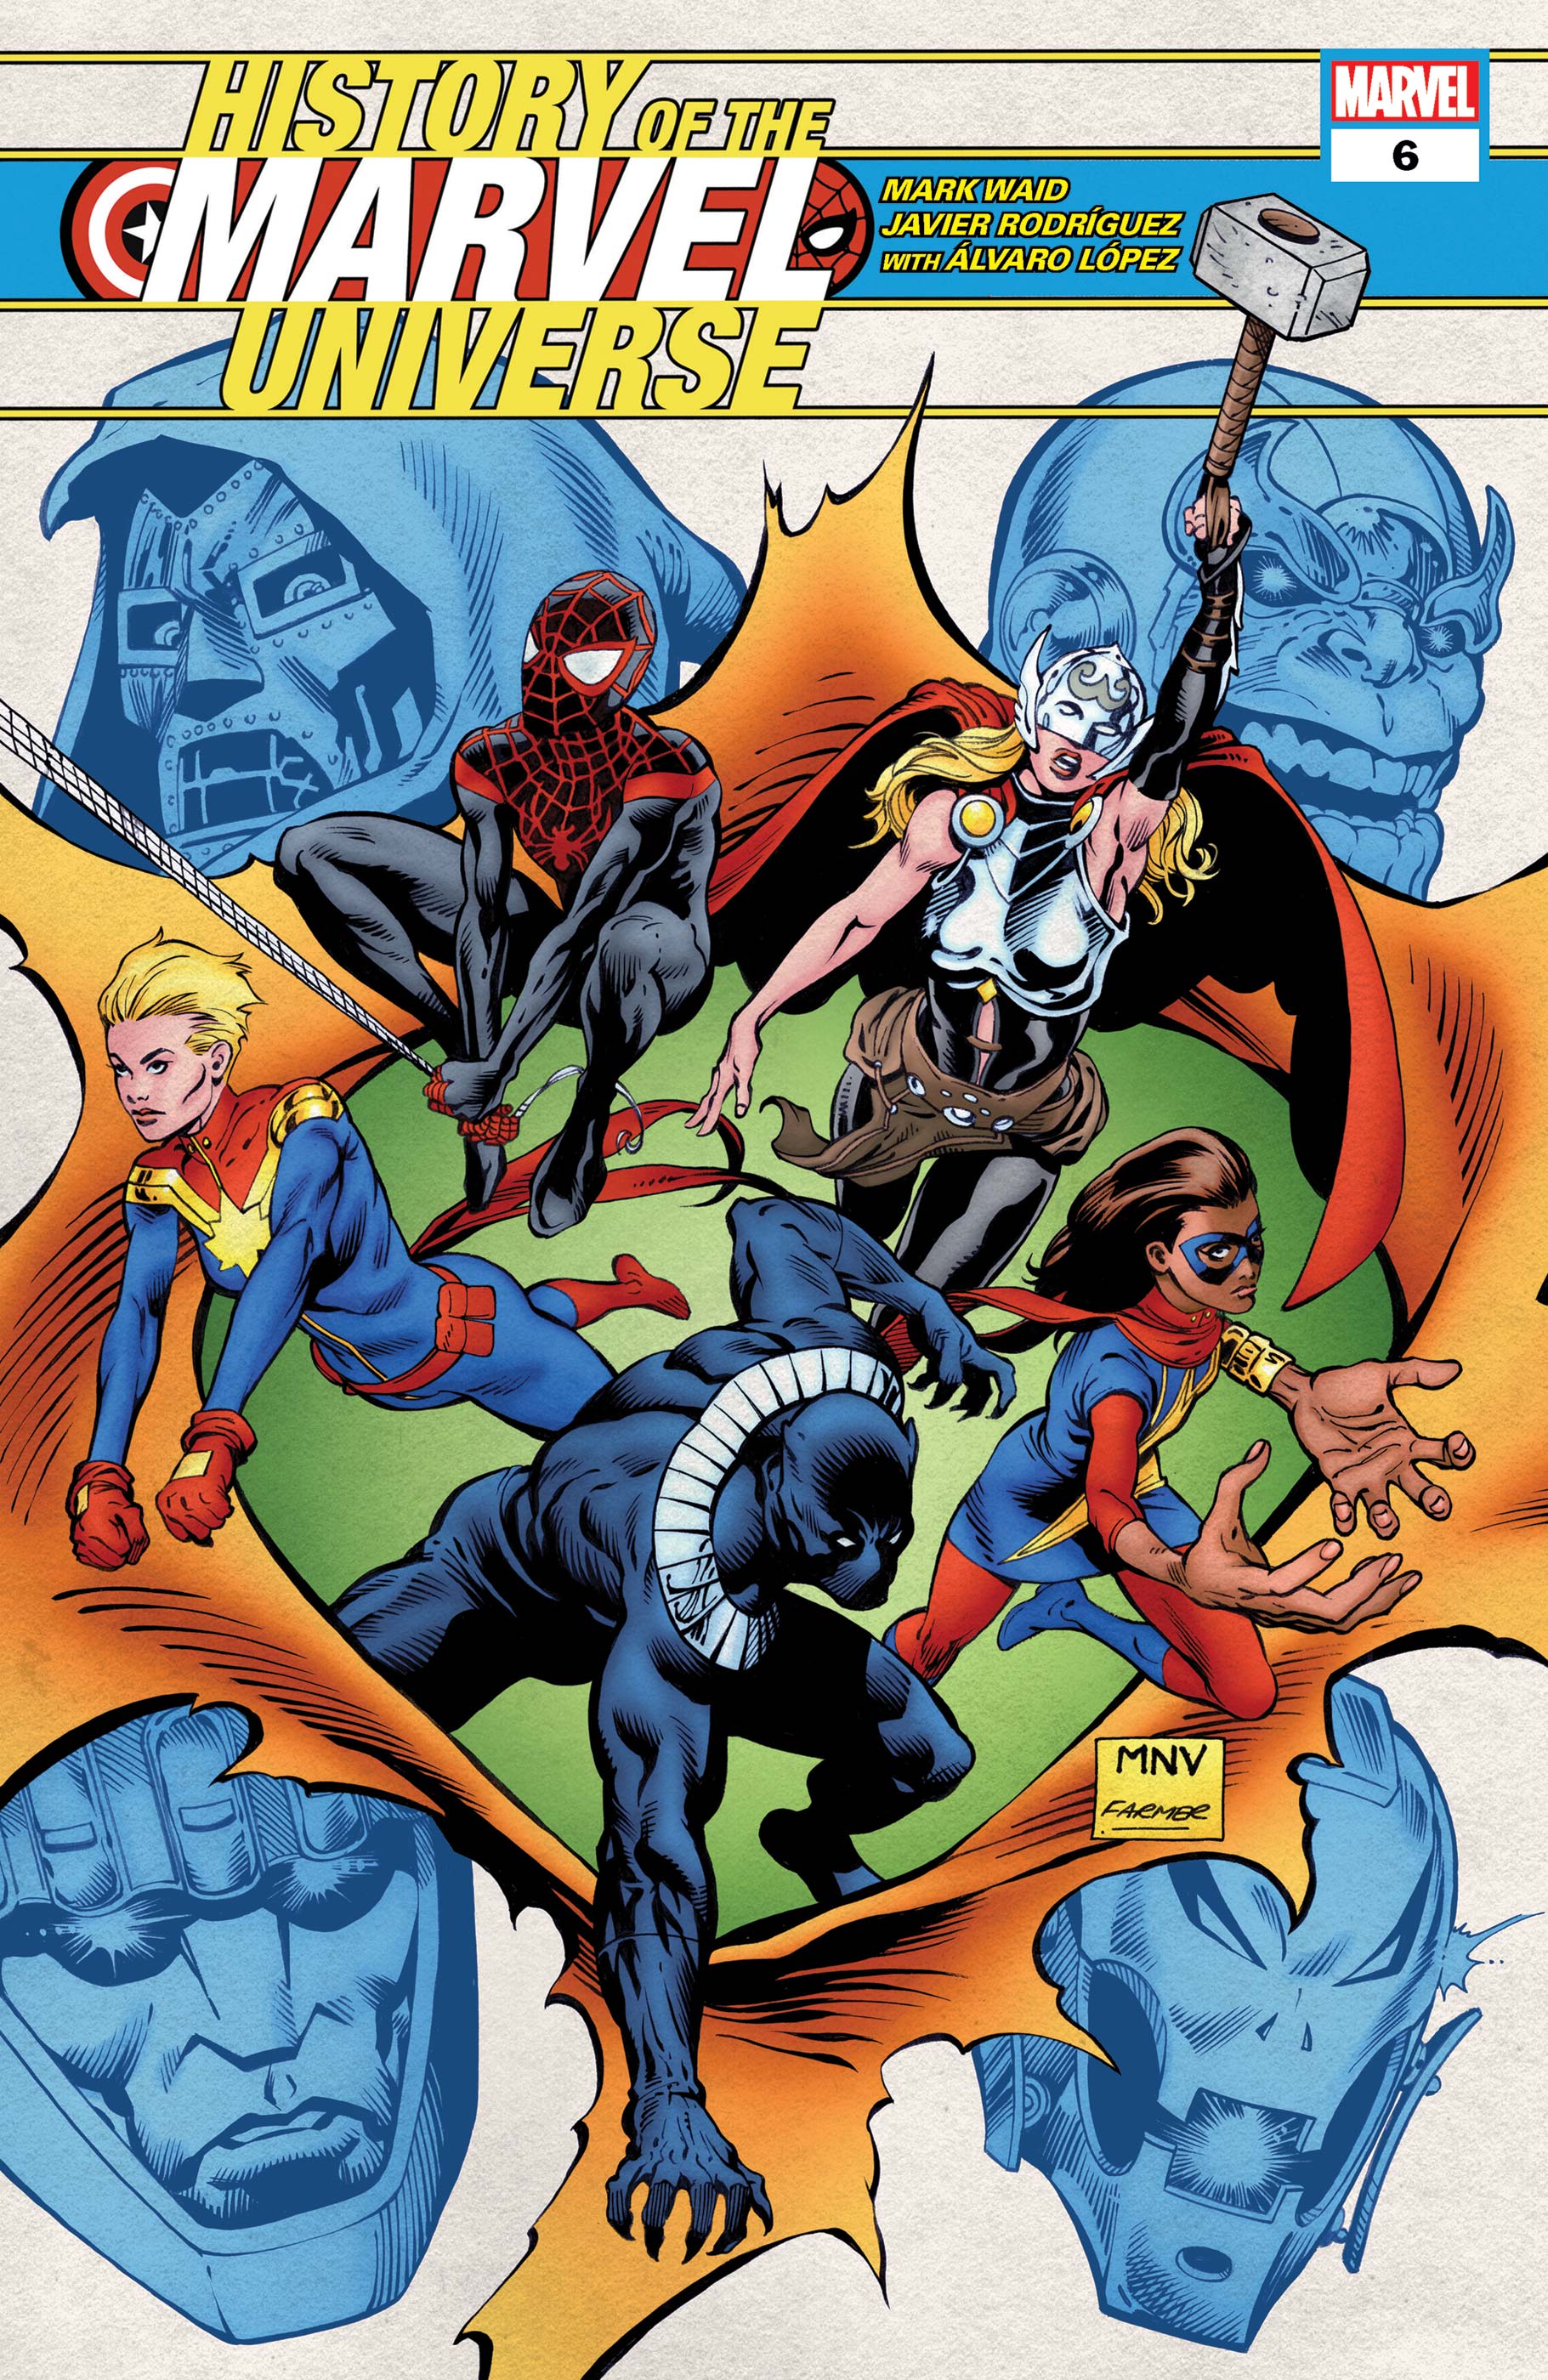 History of the Marvel Universe (2019) #6